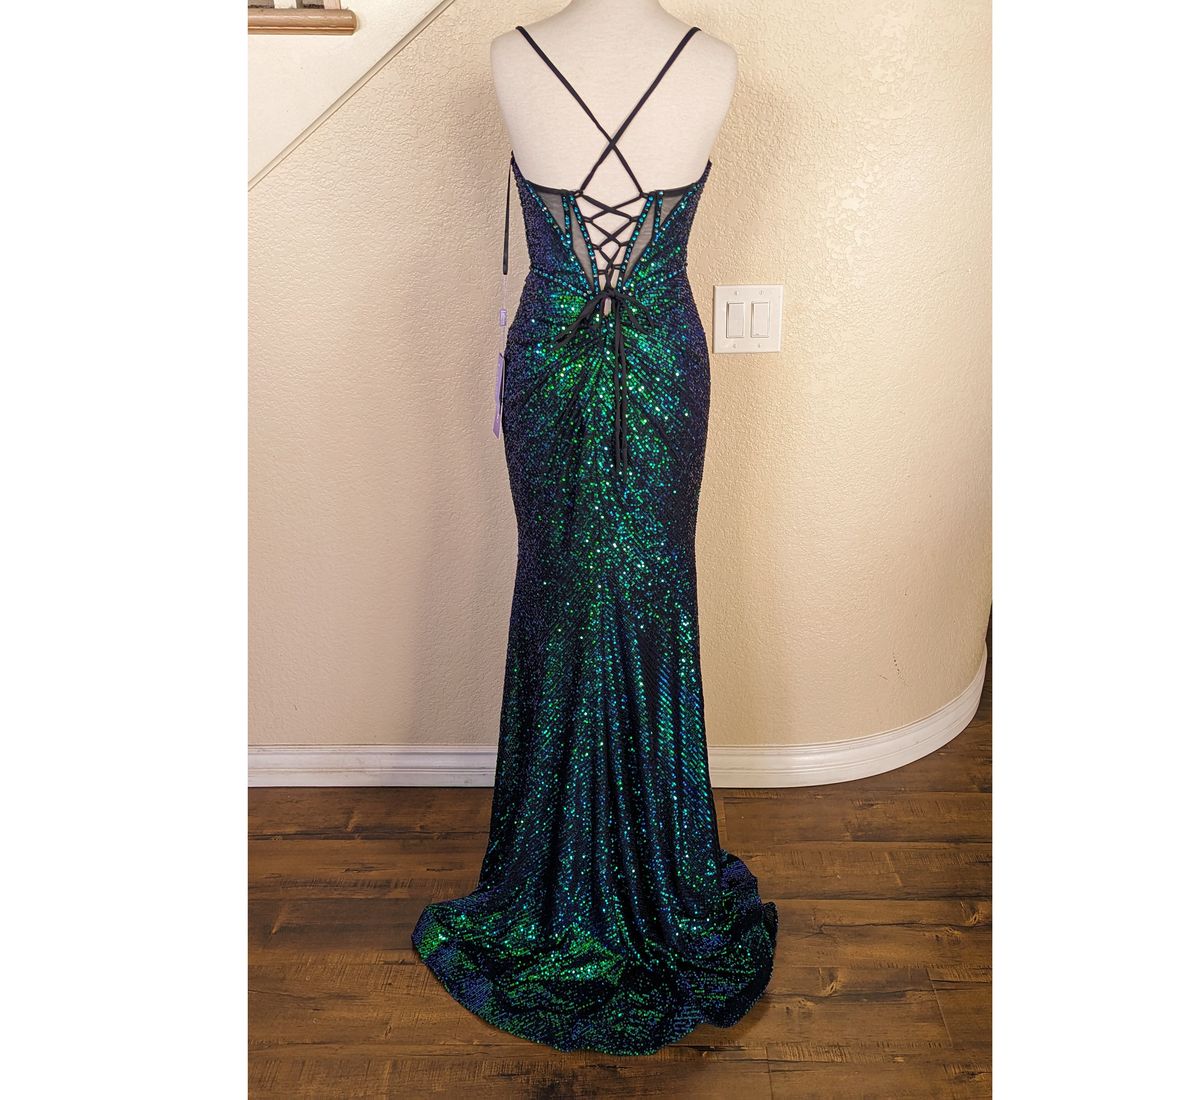 Style Green & Teal Blue Sequined Corset Formal Prom Homecoming Dress  Size 6 Prom Plunge Sheer Emerald Green Side Slit Dress on Queenly